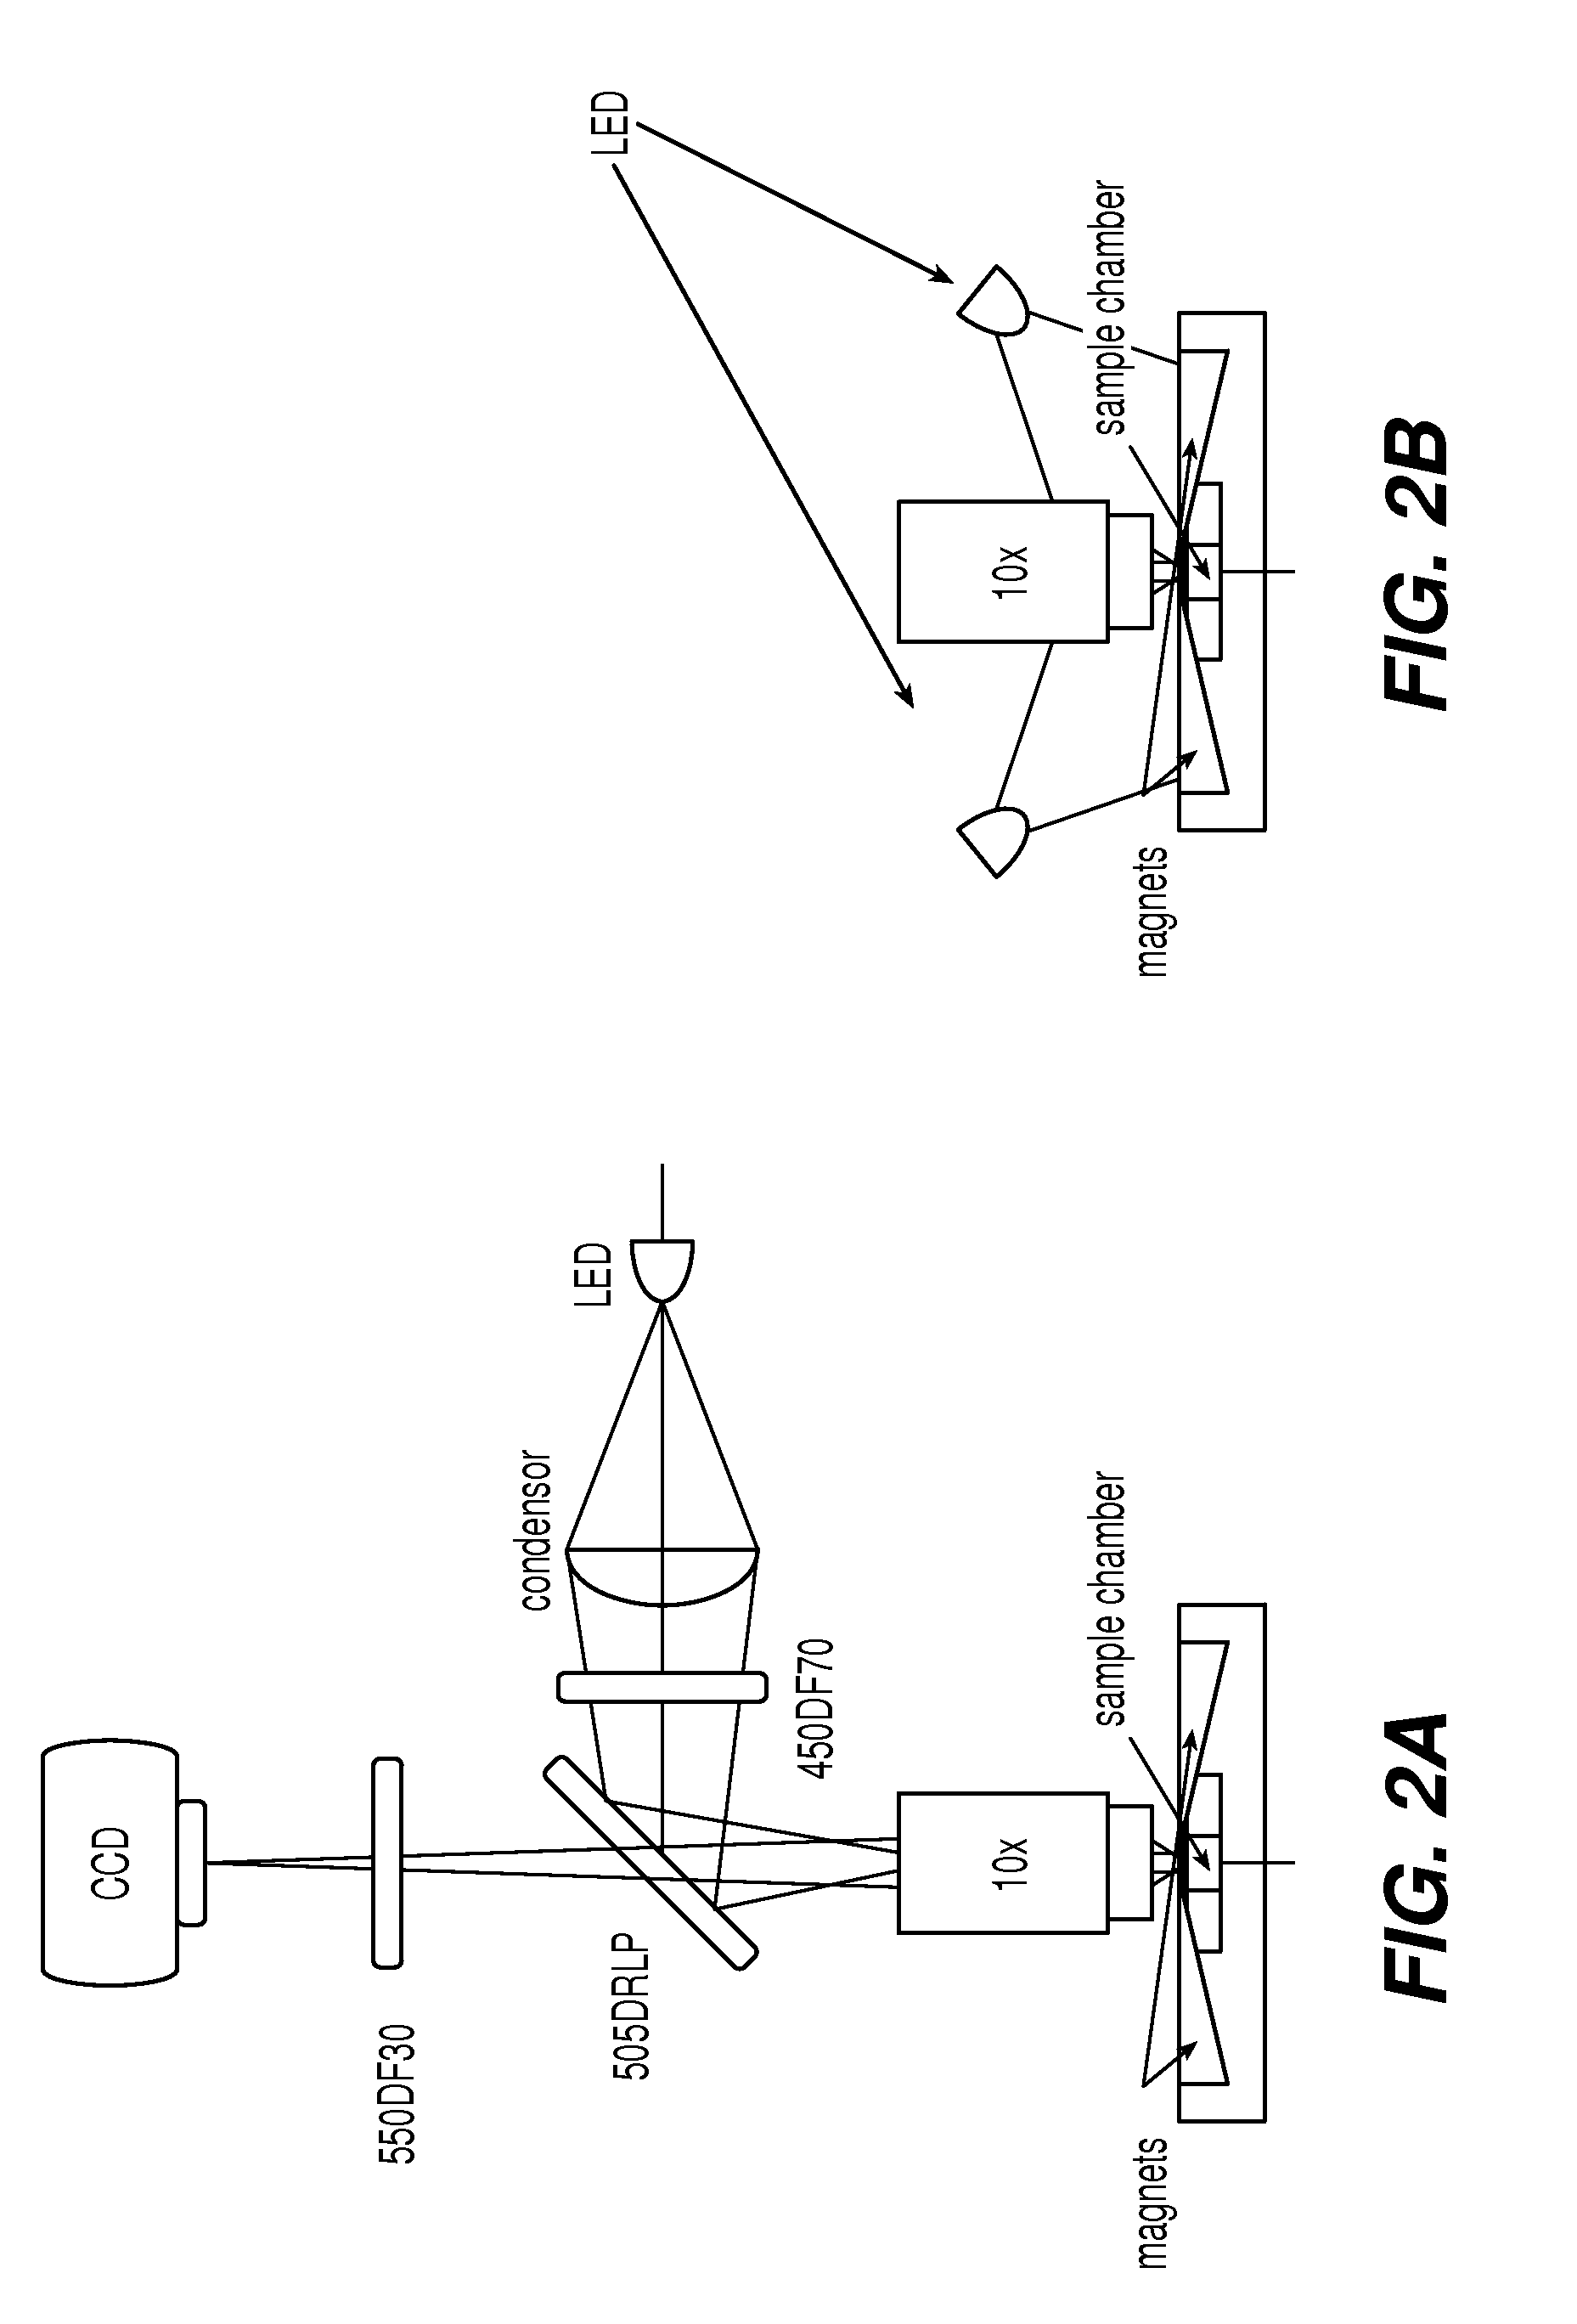 Methods and Algorithms For Cell Enumeration in a Low-Cost Cytometer